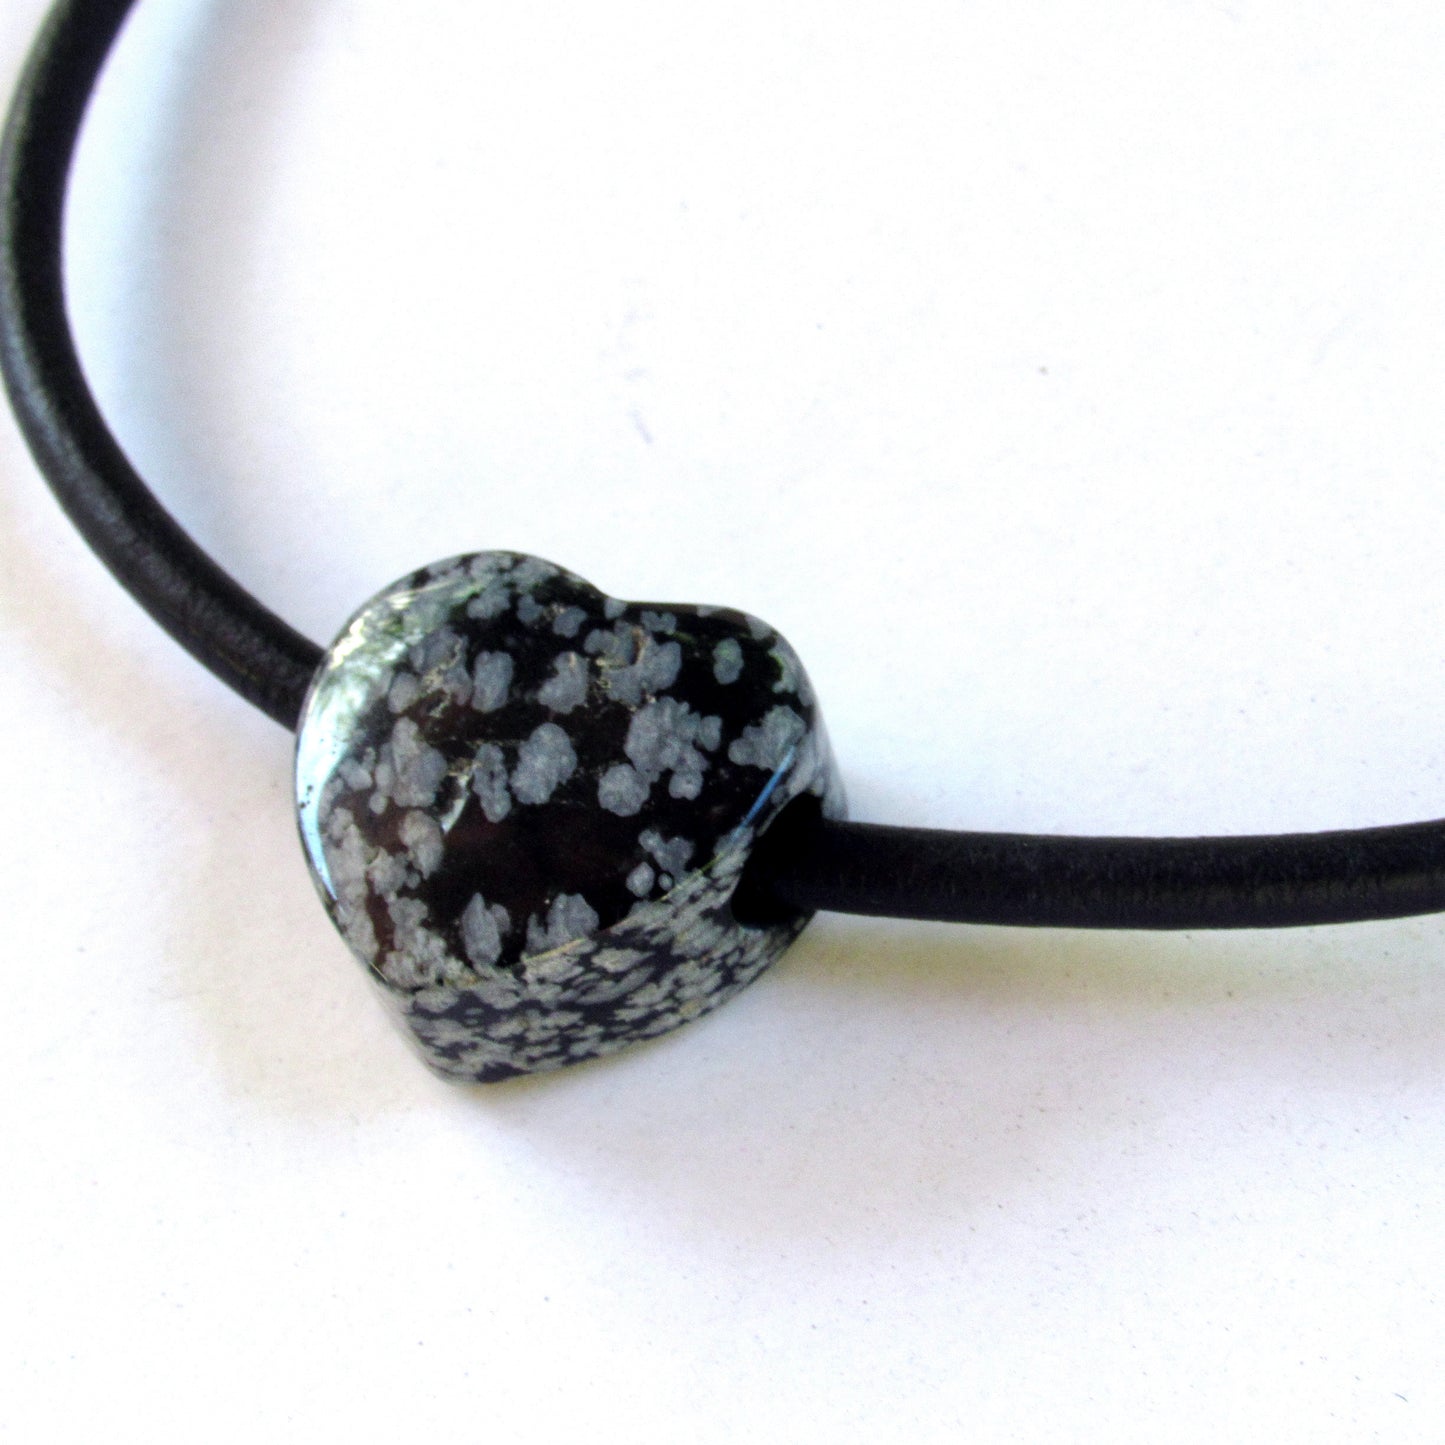 Snowflake Obsidian gemstone heart on Leather with Sterling Silver Clasp